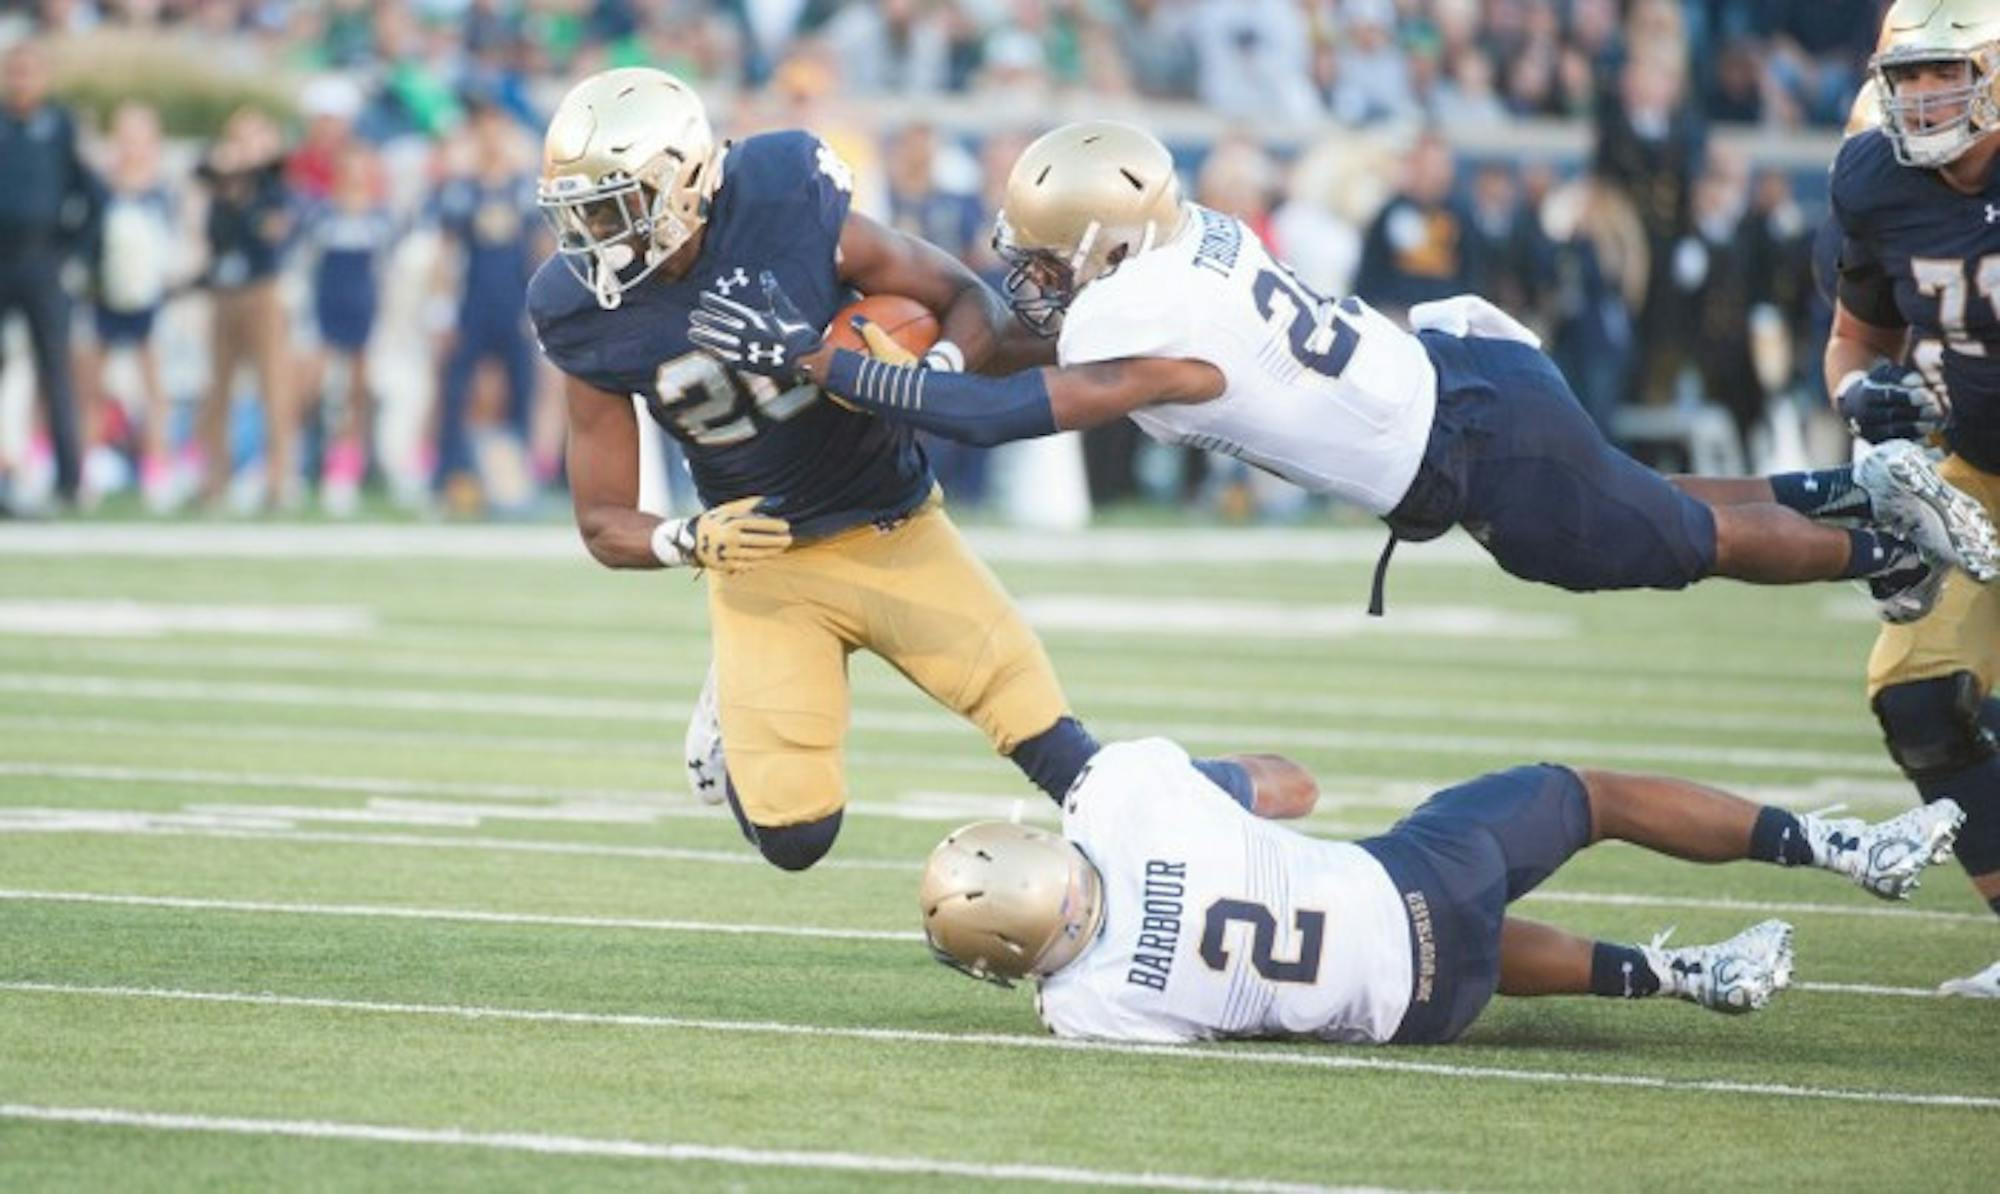 Senior running back C.J. Prosise attempts to evade two defenders during Notre Dame’s 41- 24 victory over Navy on Saturday.